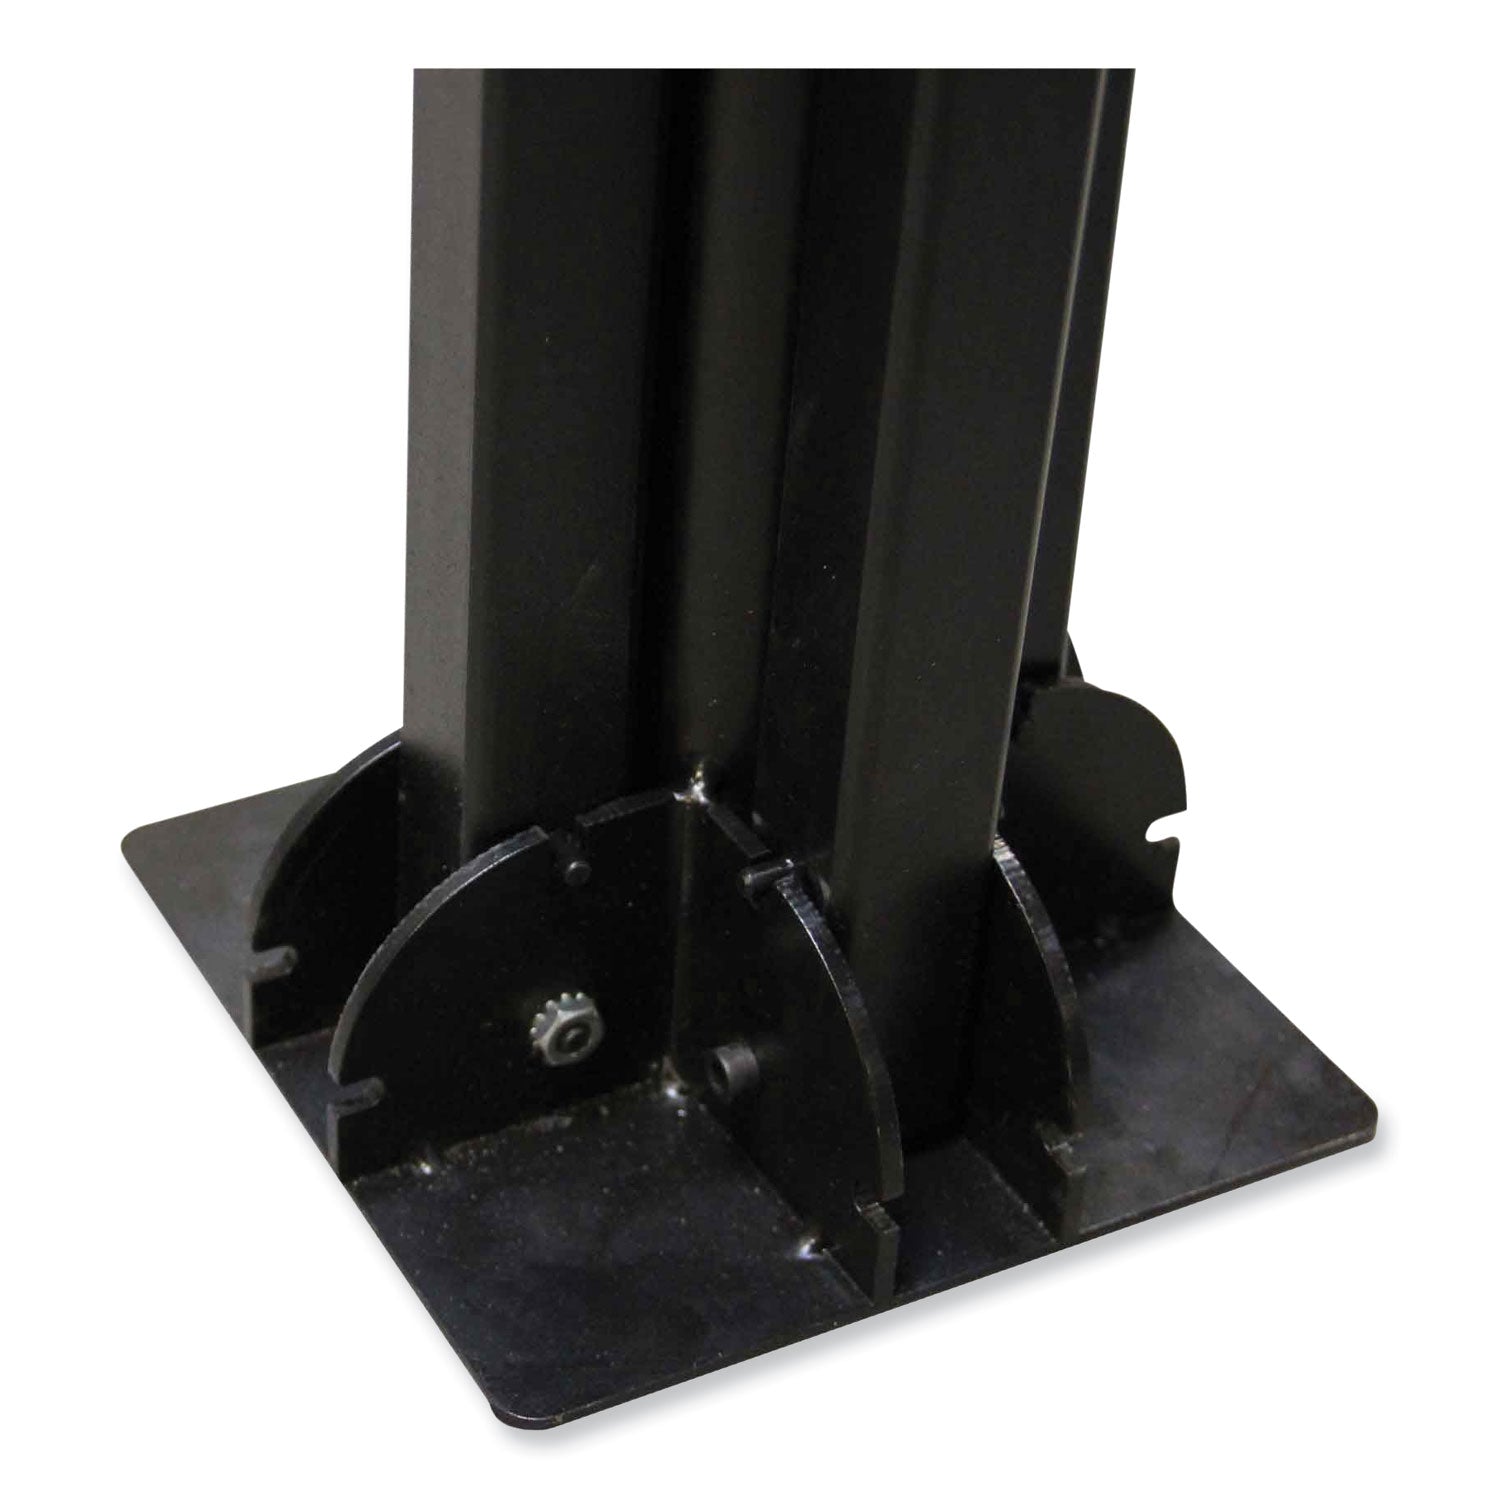 shax-6190-umbrella-stand-165-cylinder-with-set-screw-clamp-metal-48-x-48-x-10-black-ships-in-1-3-business-days_ego12990 - 4